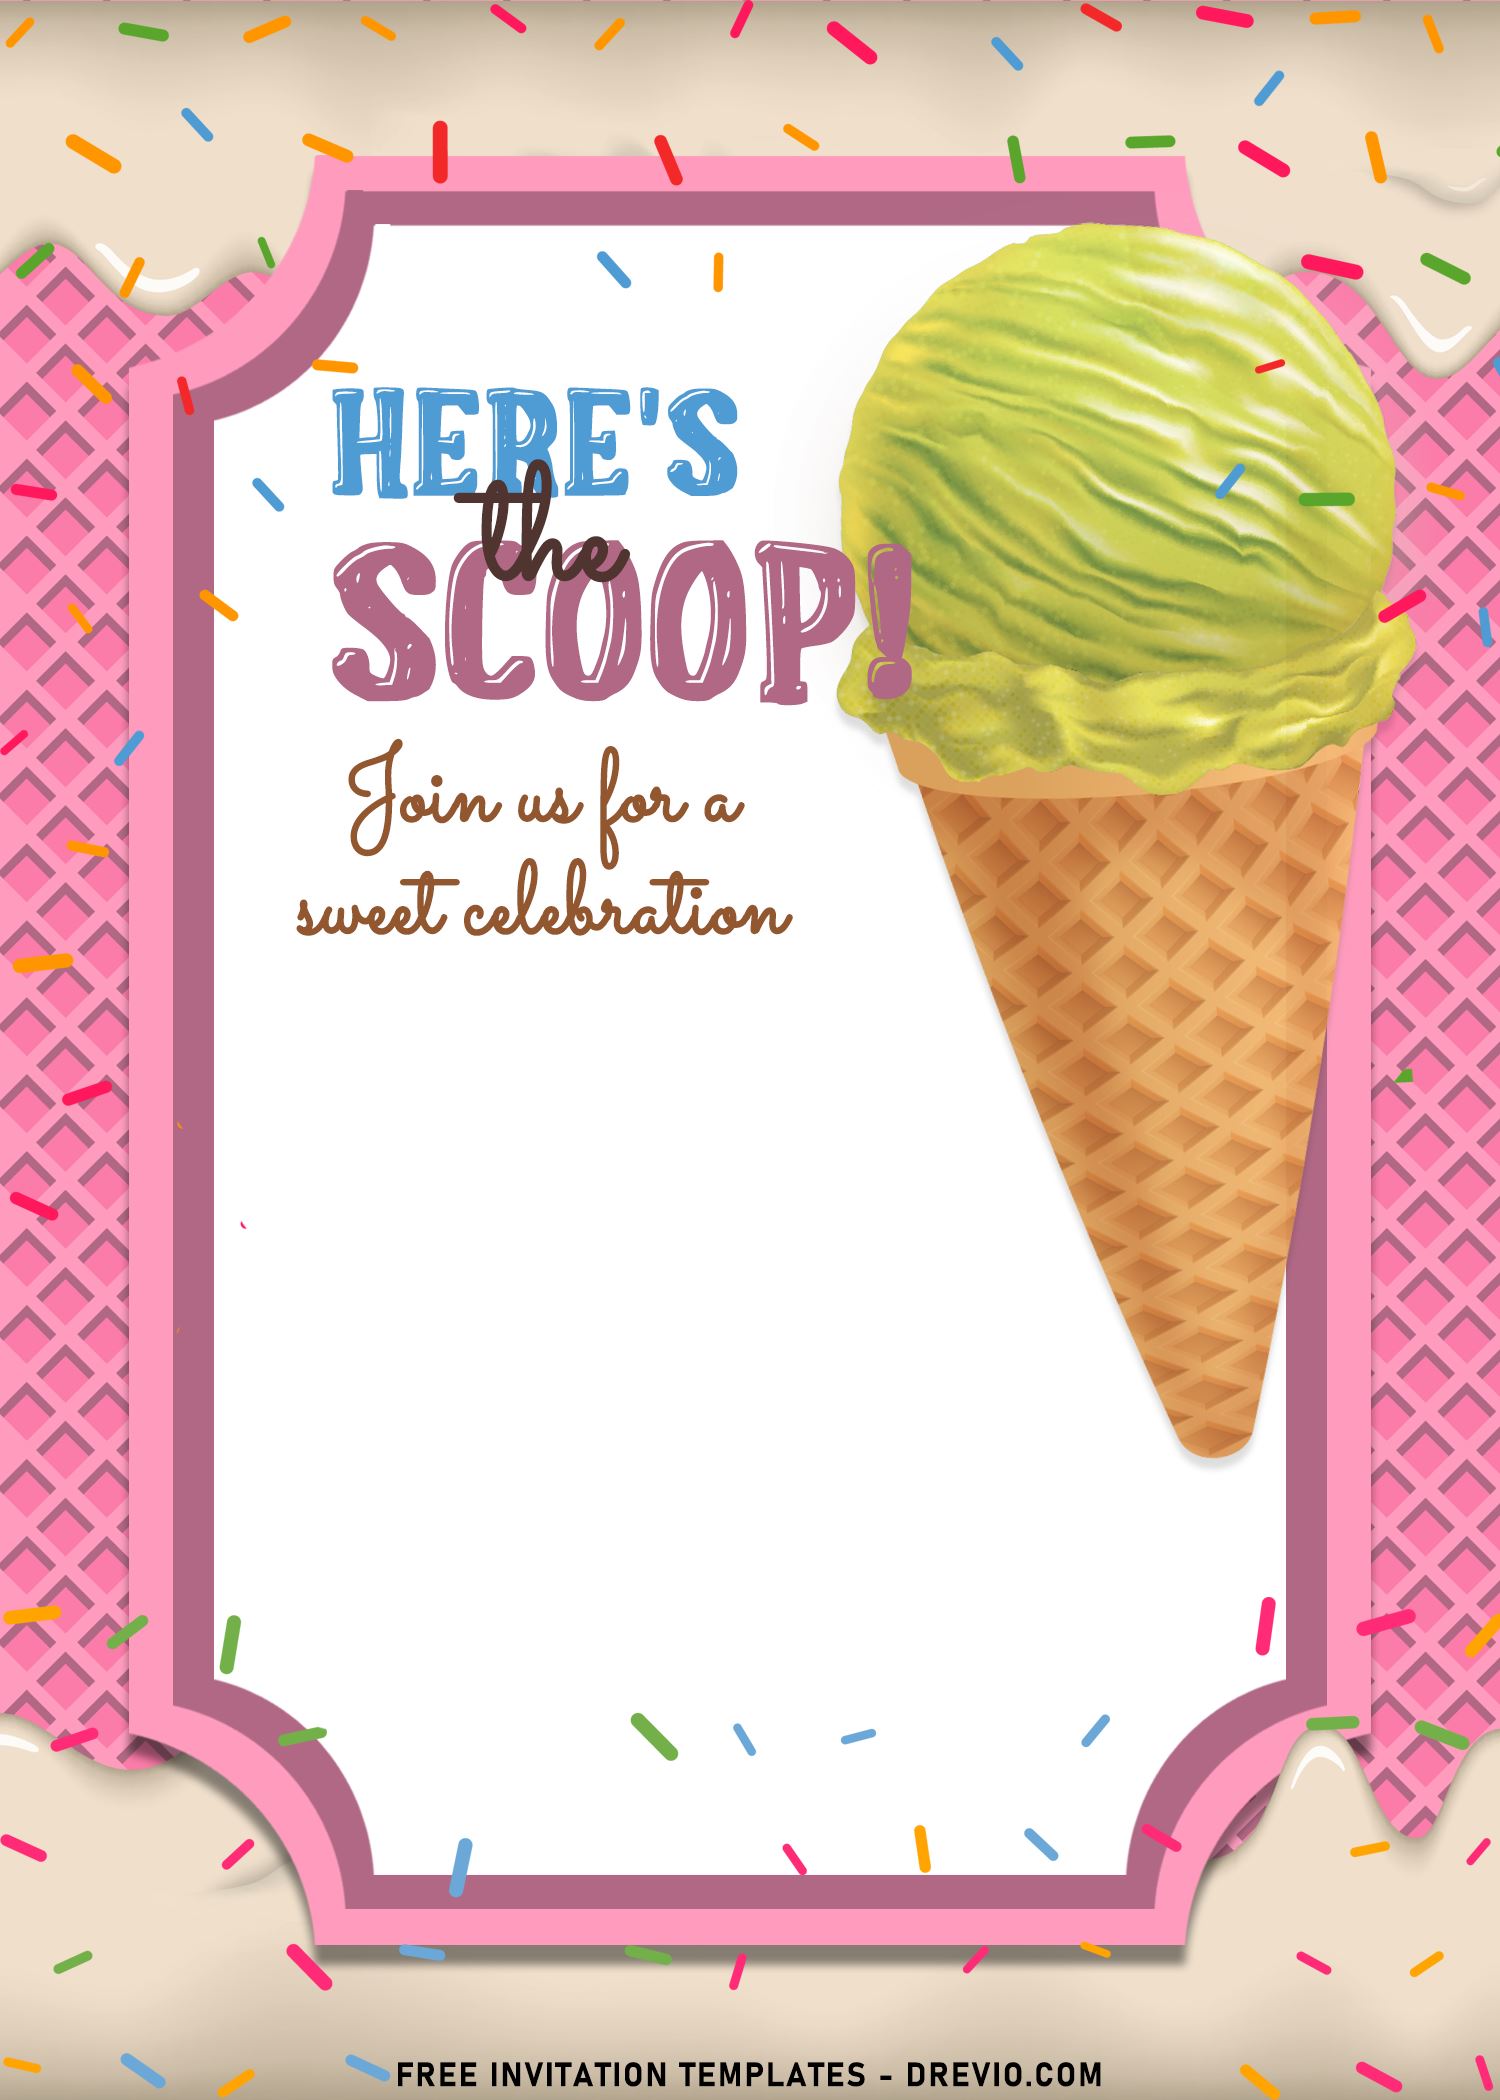 9-ice-cream-party-invitation-templates-for-kids-download-hundreds-free-printable-birthday